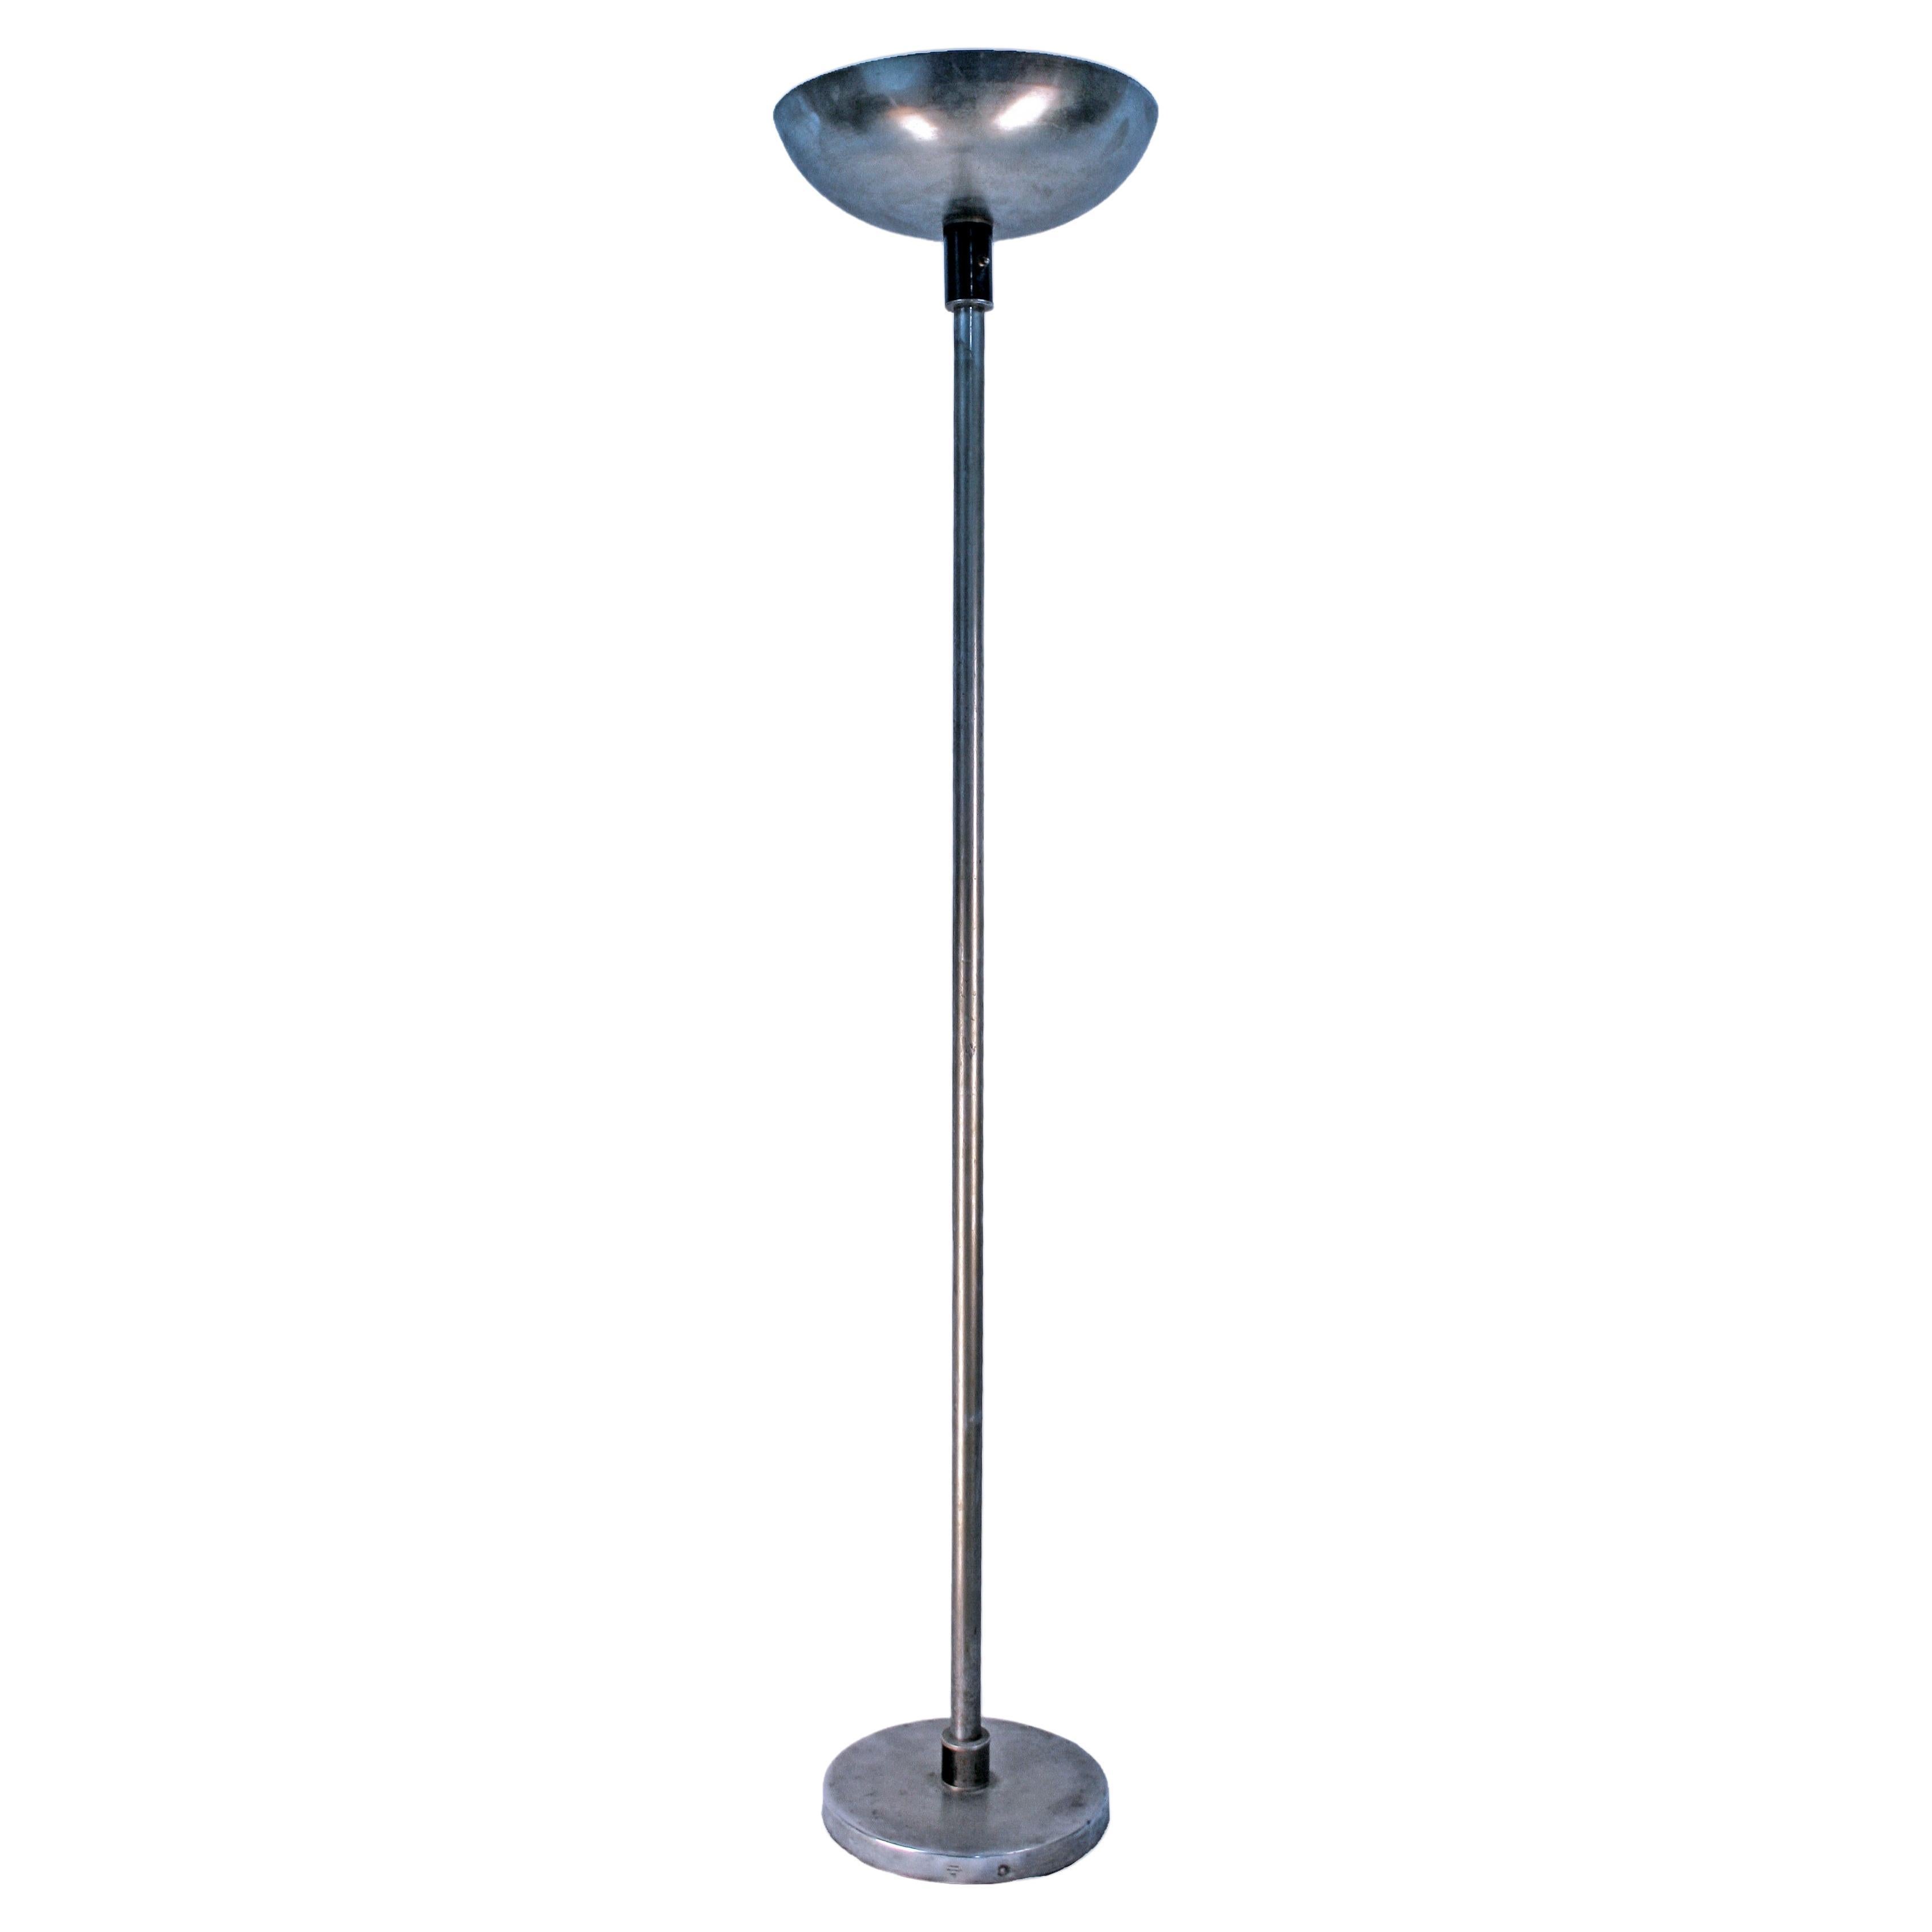 Art Déco French Polished Nickel Plated Chrome Floor Lamp by La Maison Desny For Sale